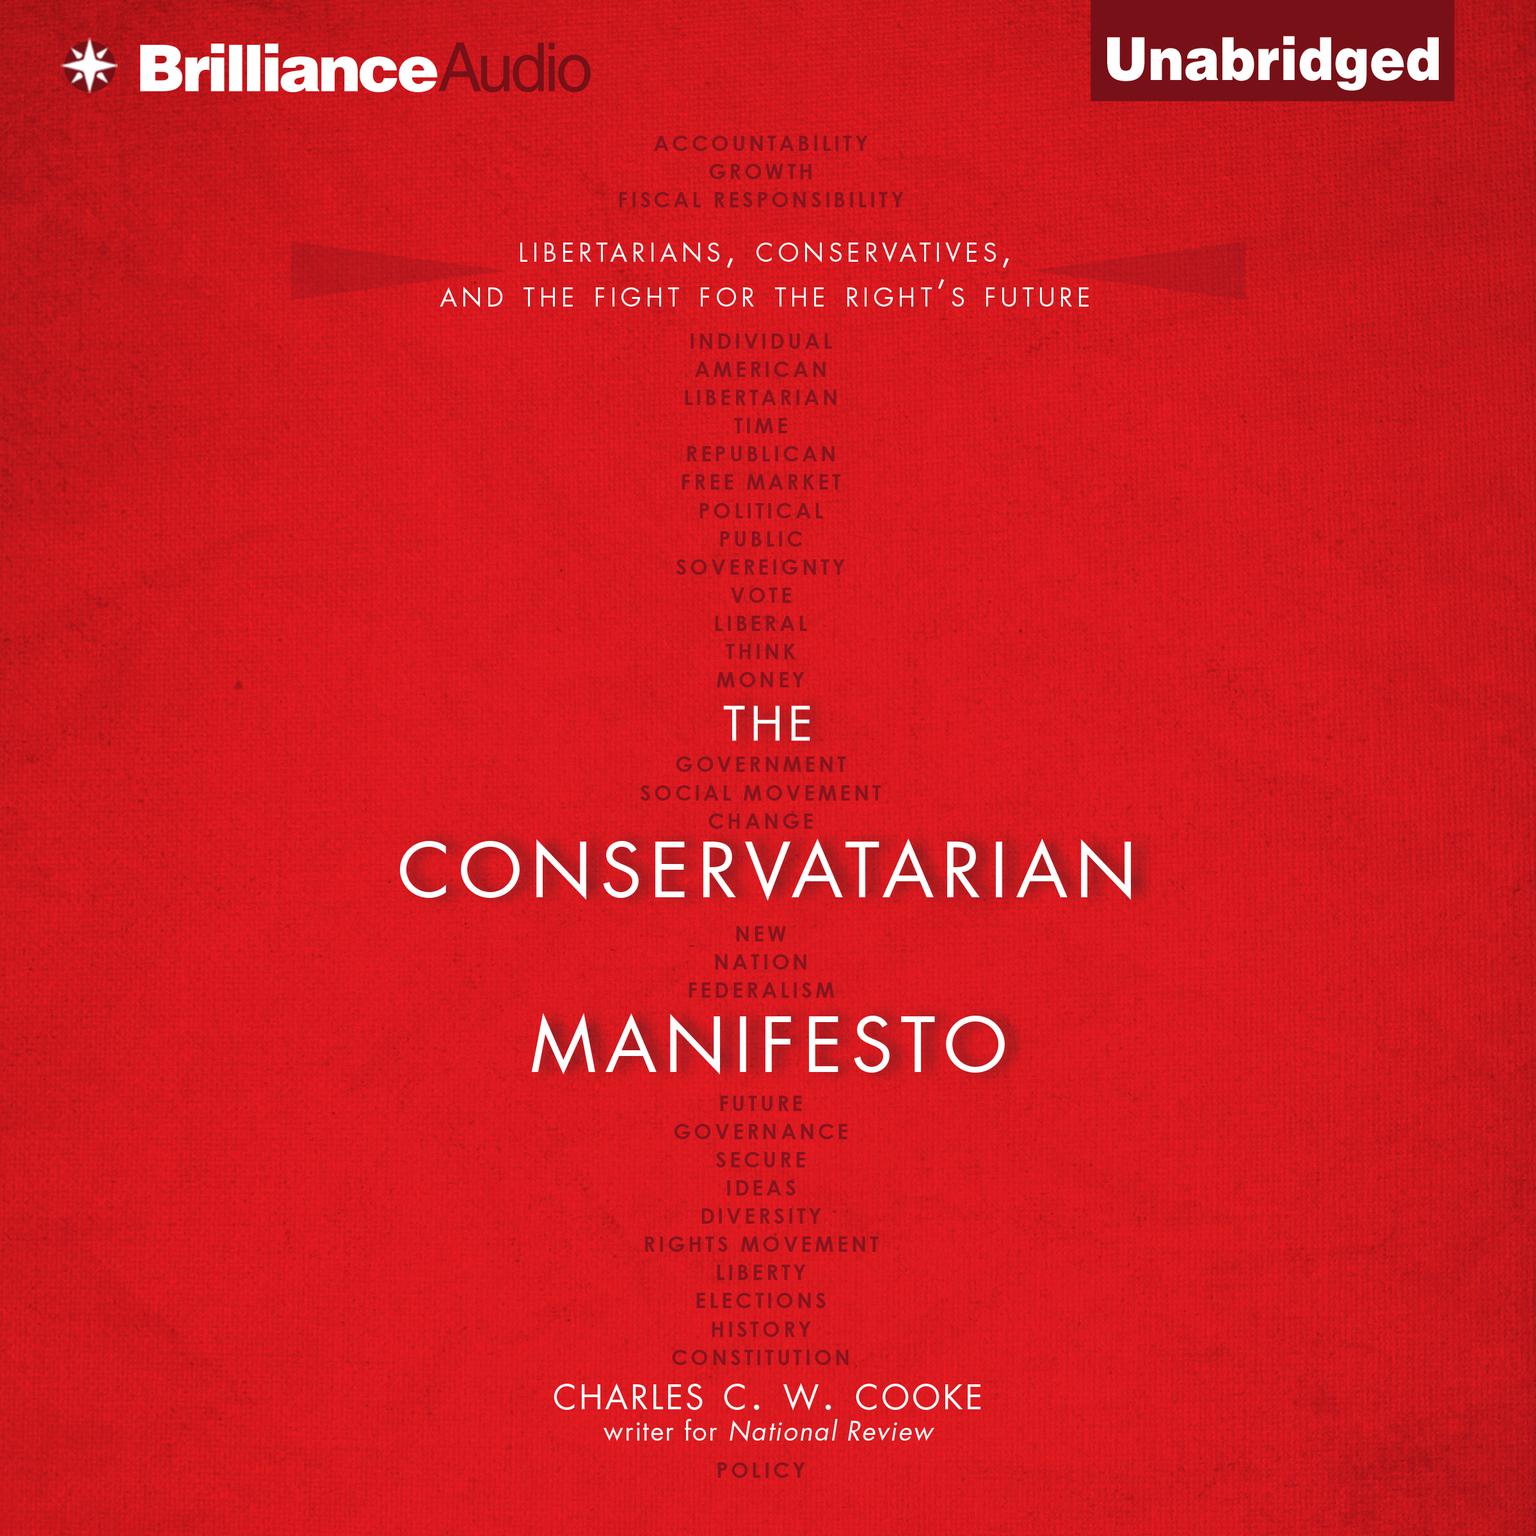 The Conservatarian Manifesto: Libertarians, Conservatives, and the Fight for the Rights Future Audiobook, by Charles C.W. Cooke